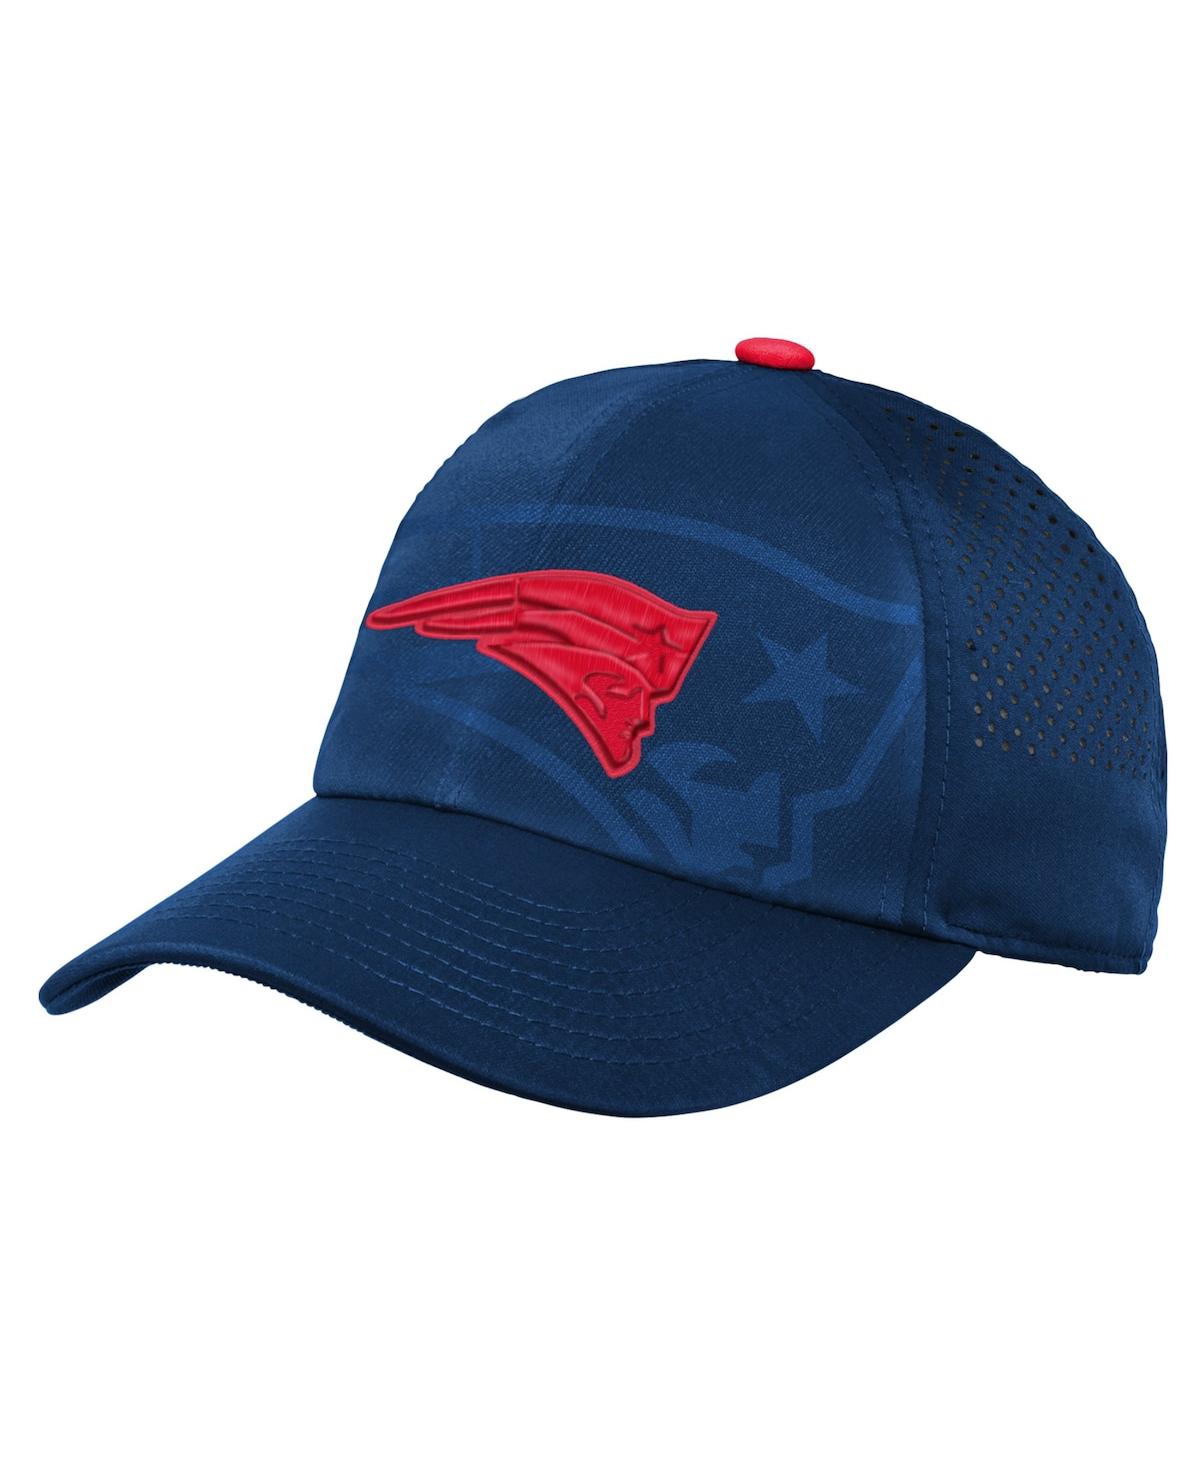 Outerstuff Kids' Youth Boys And Girls Navy New England Patriots Tailgate Adjustable Hat